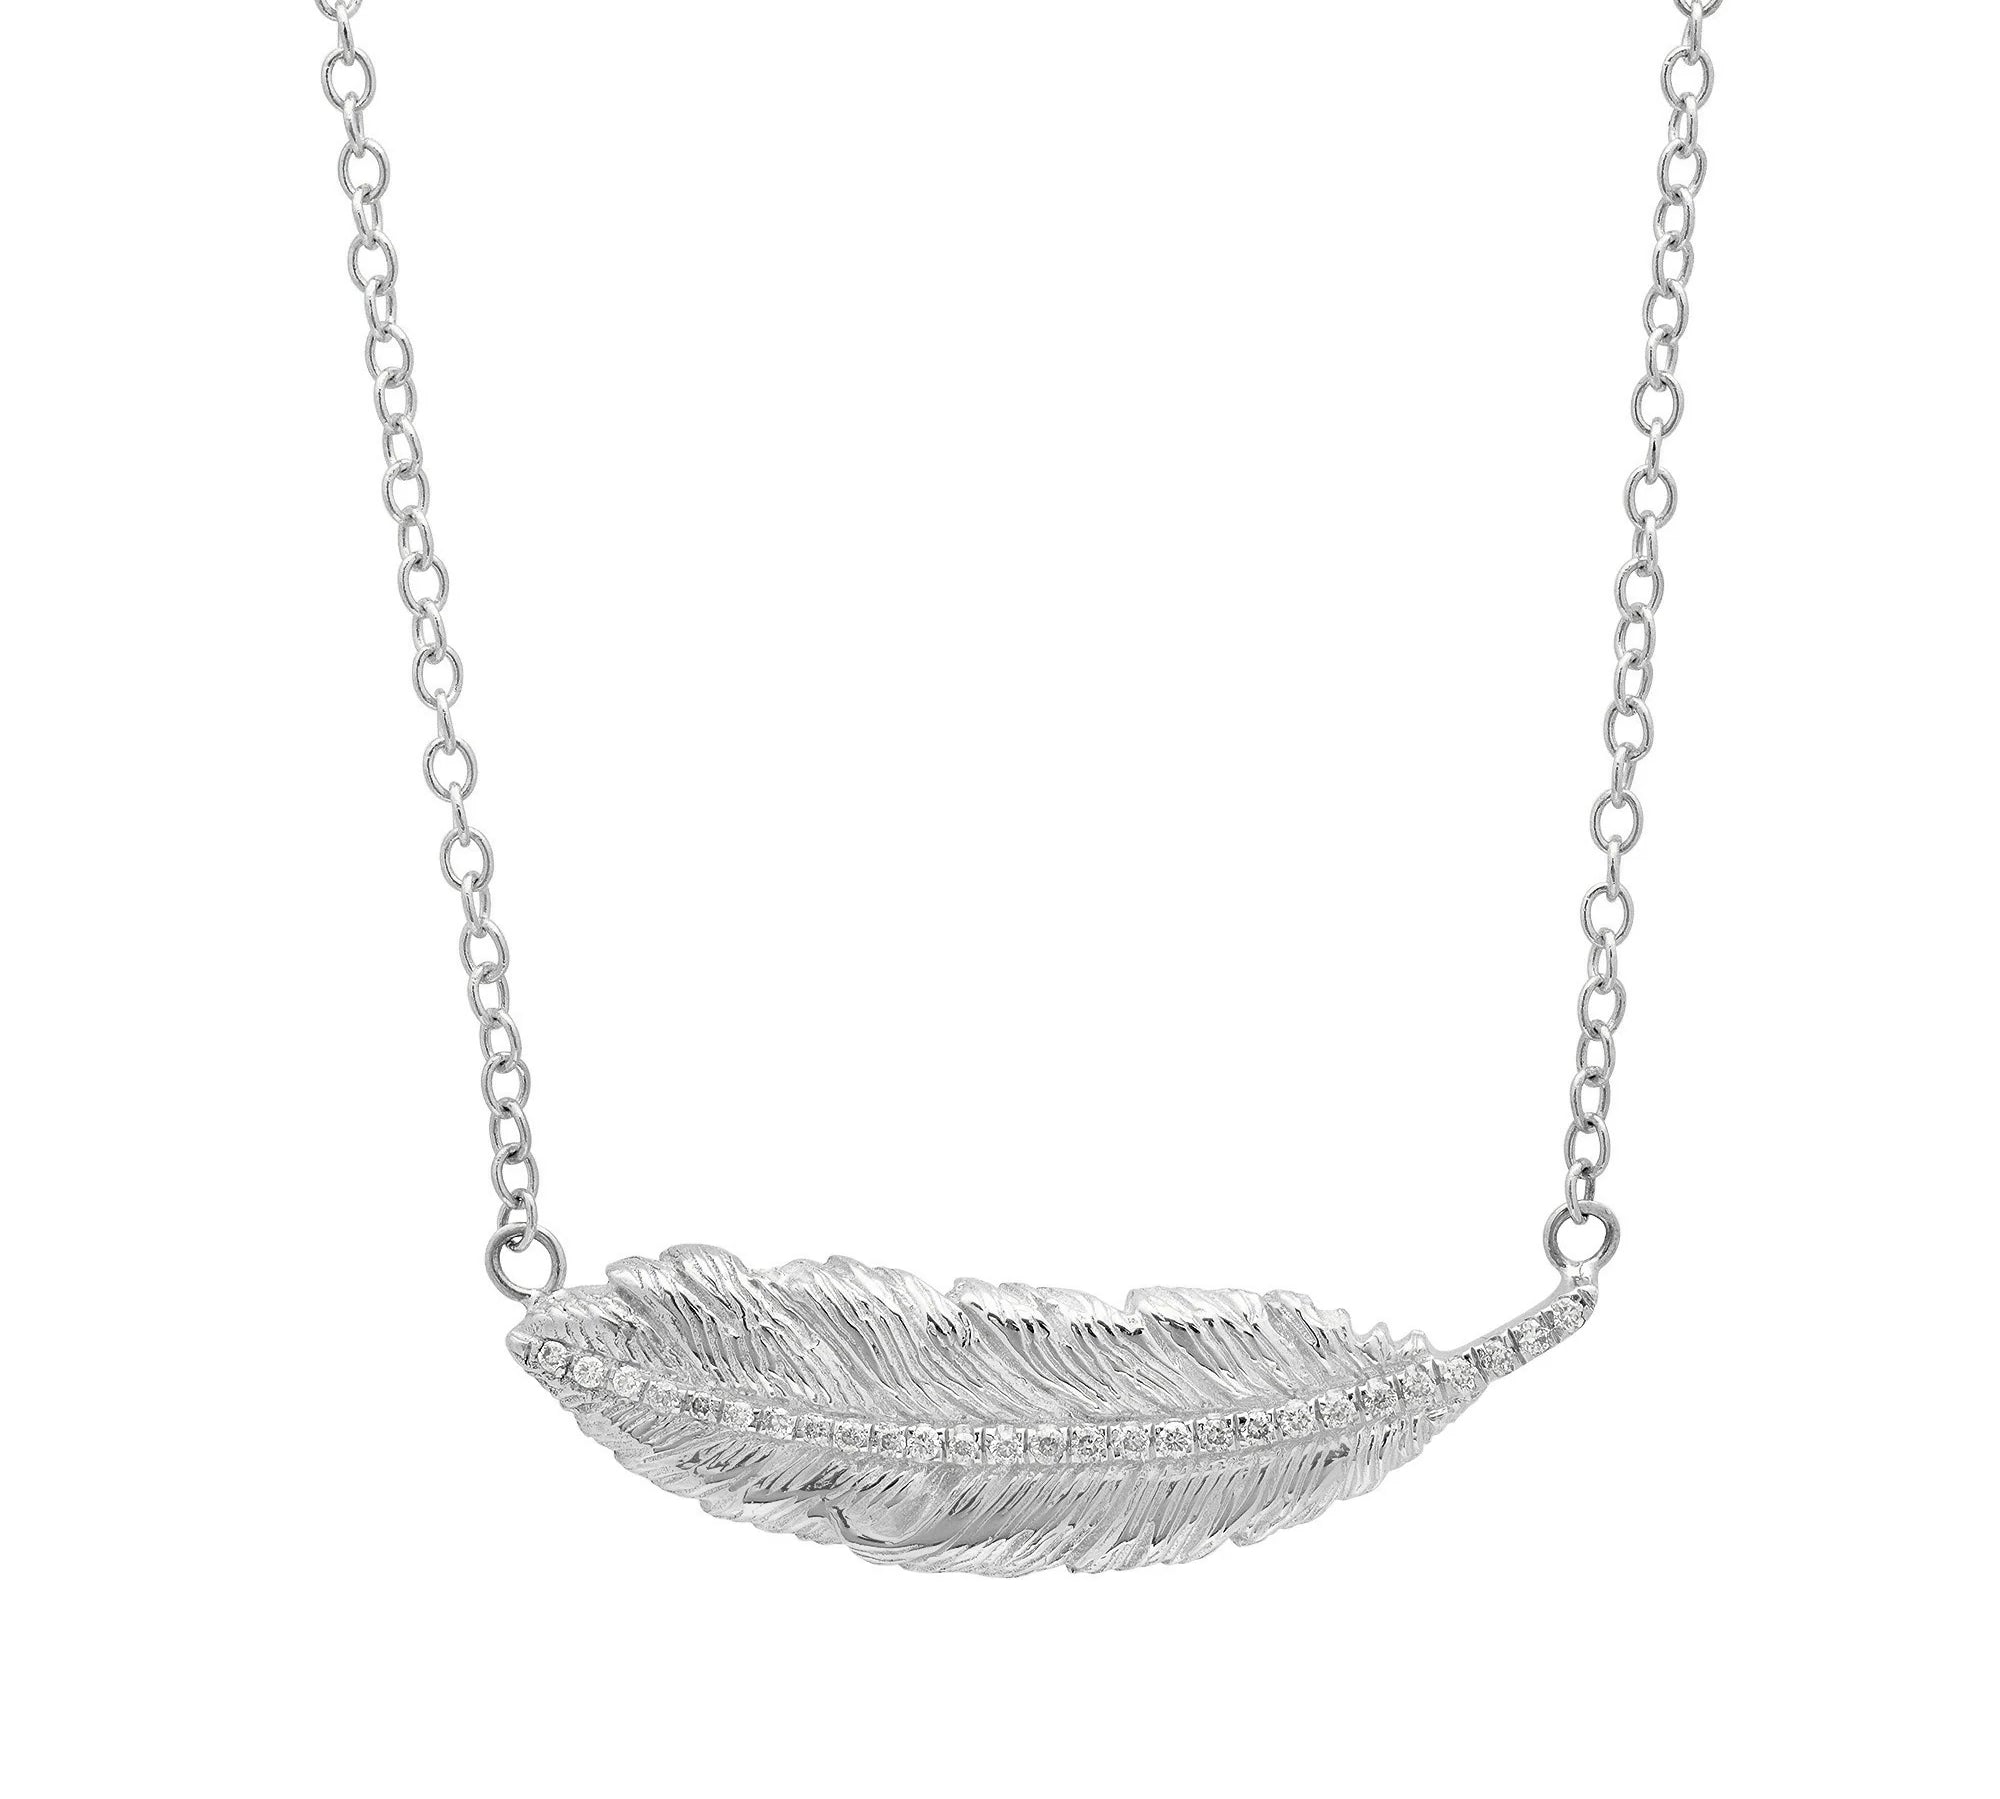 Small Feather Necklace Pendant Elisabeth Bell Jewelry White Gold  